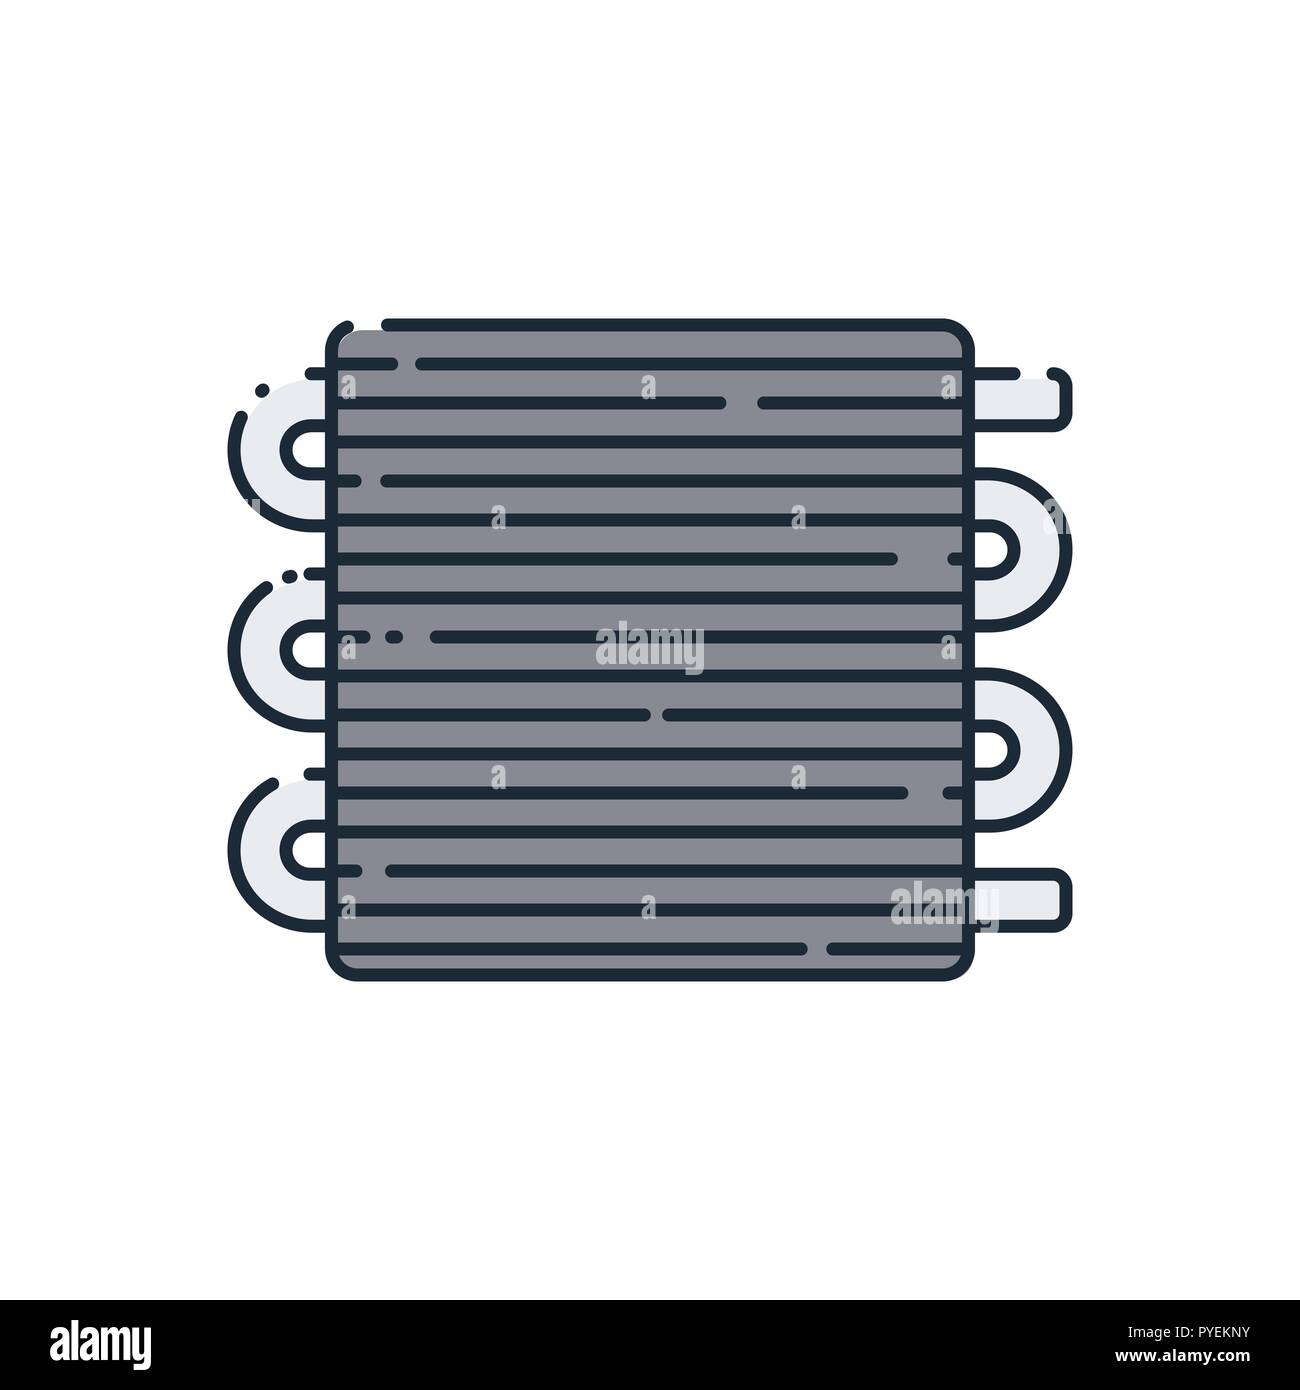 Flat icon on the car radiator. Vector illustration. Cooler in the cooling system. Stock Vector